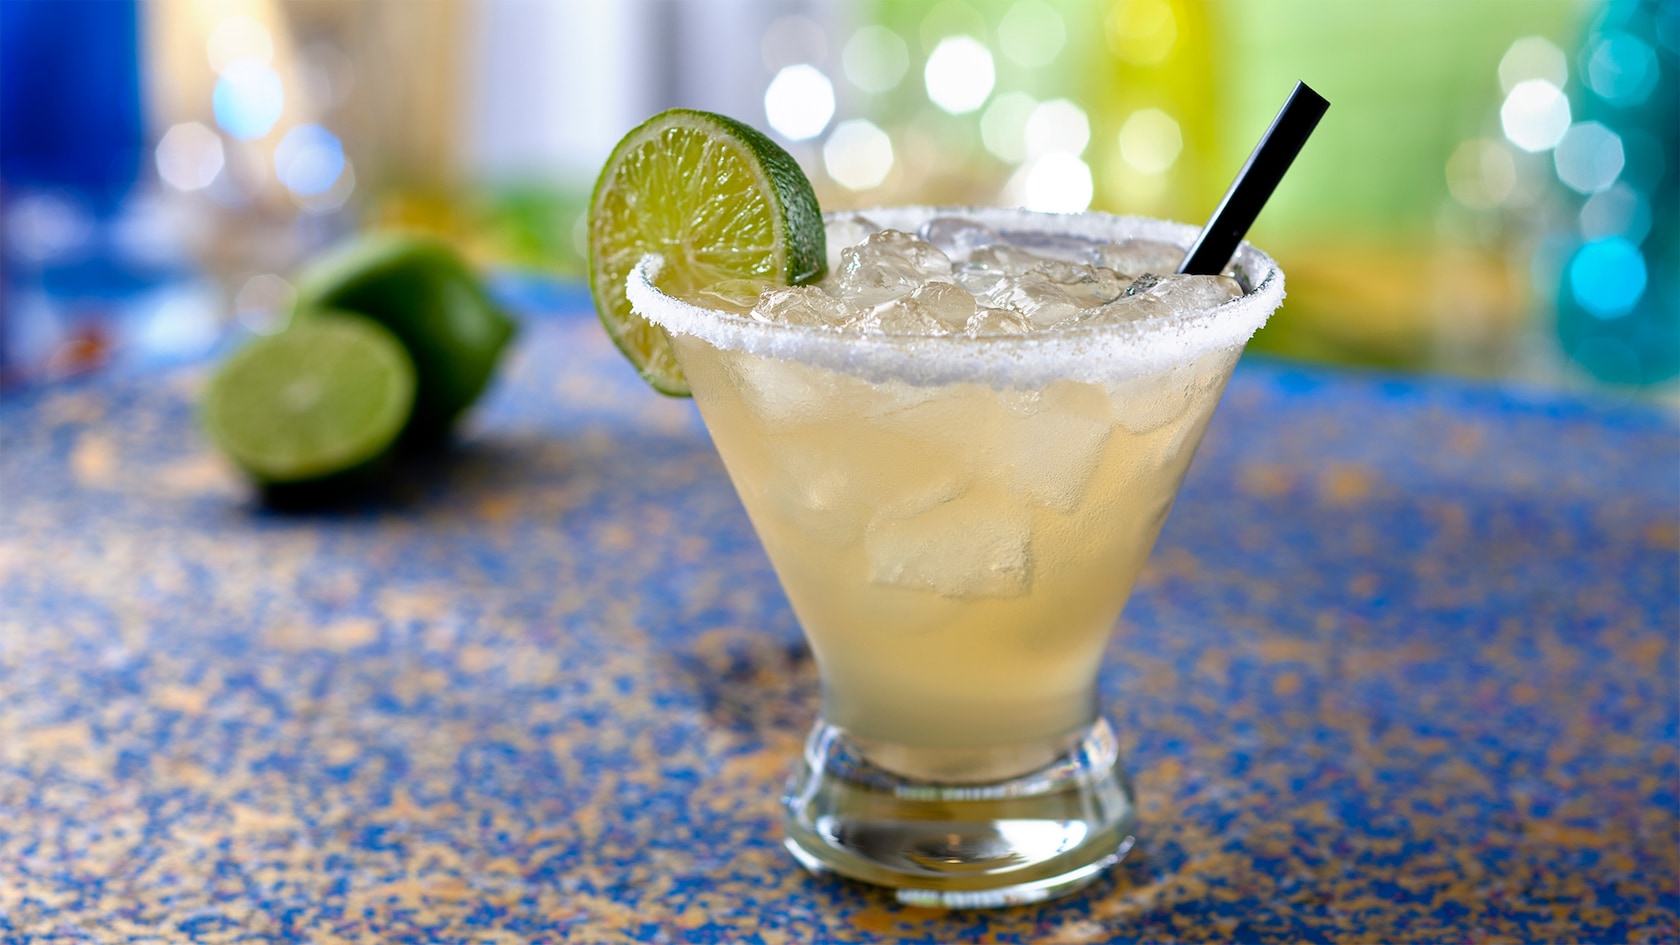 On February 22nd, Celebrate National Margarita Day at these 5 Walt Disney World Drink Destinations - and more! 1